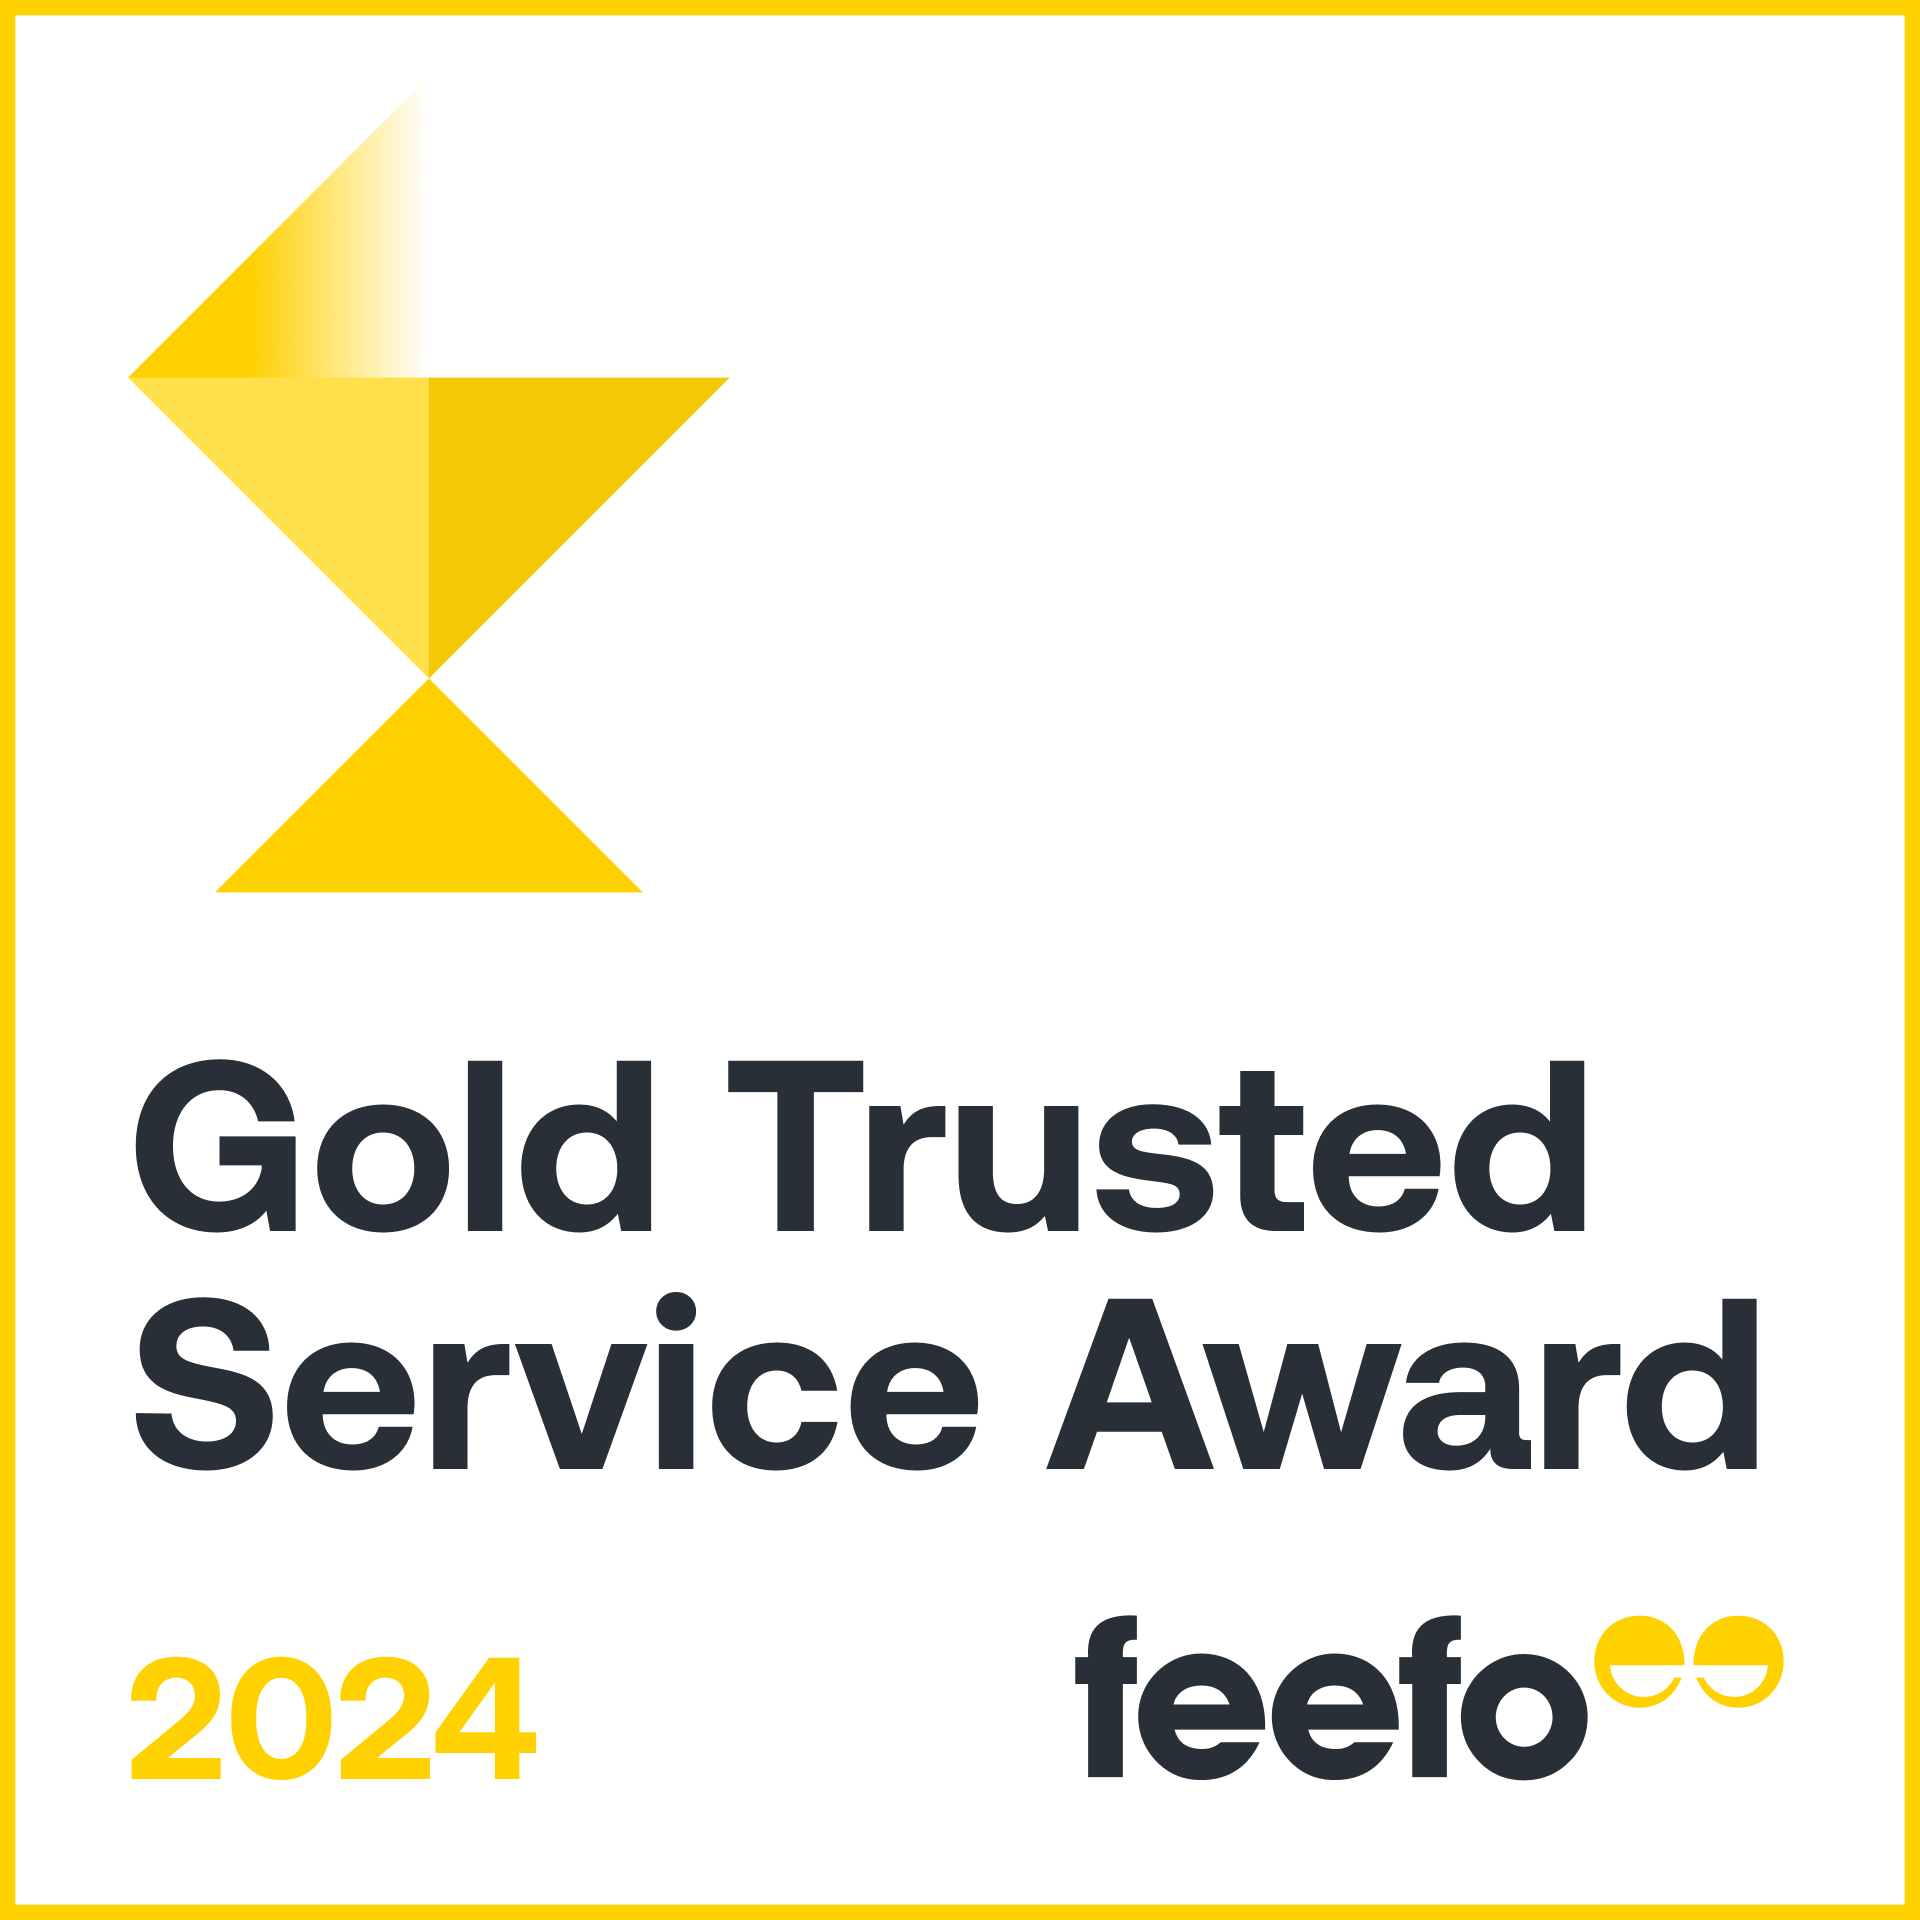 Gold Trusted Service Award 2024